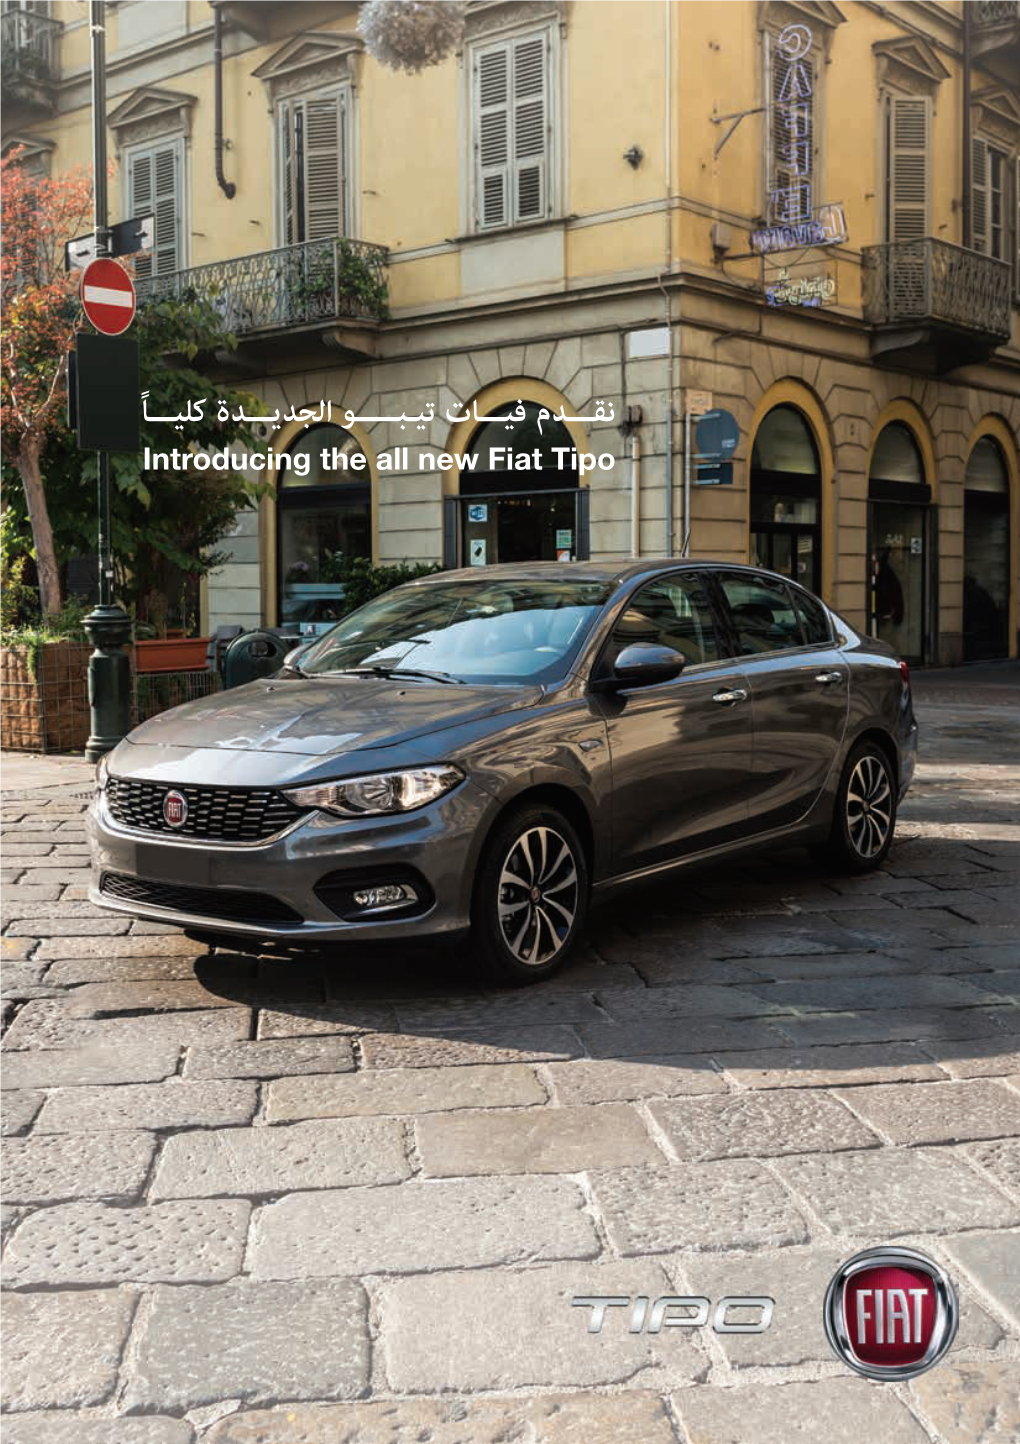 Introducing the All New Fiat Tipo